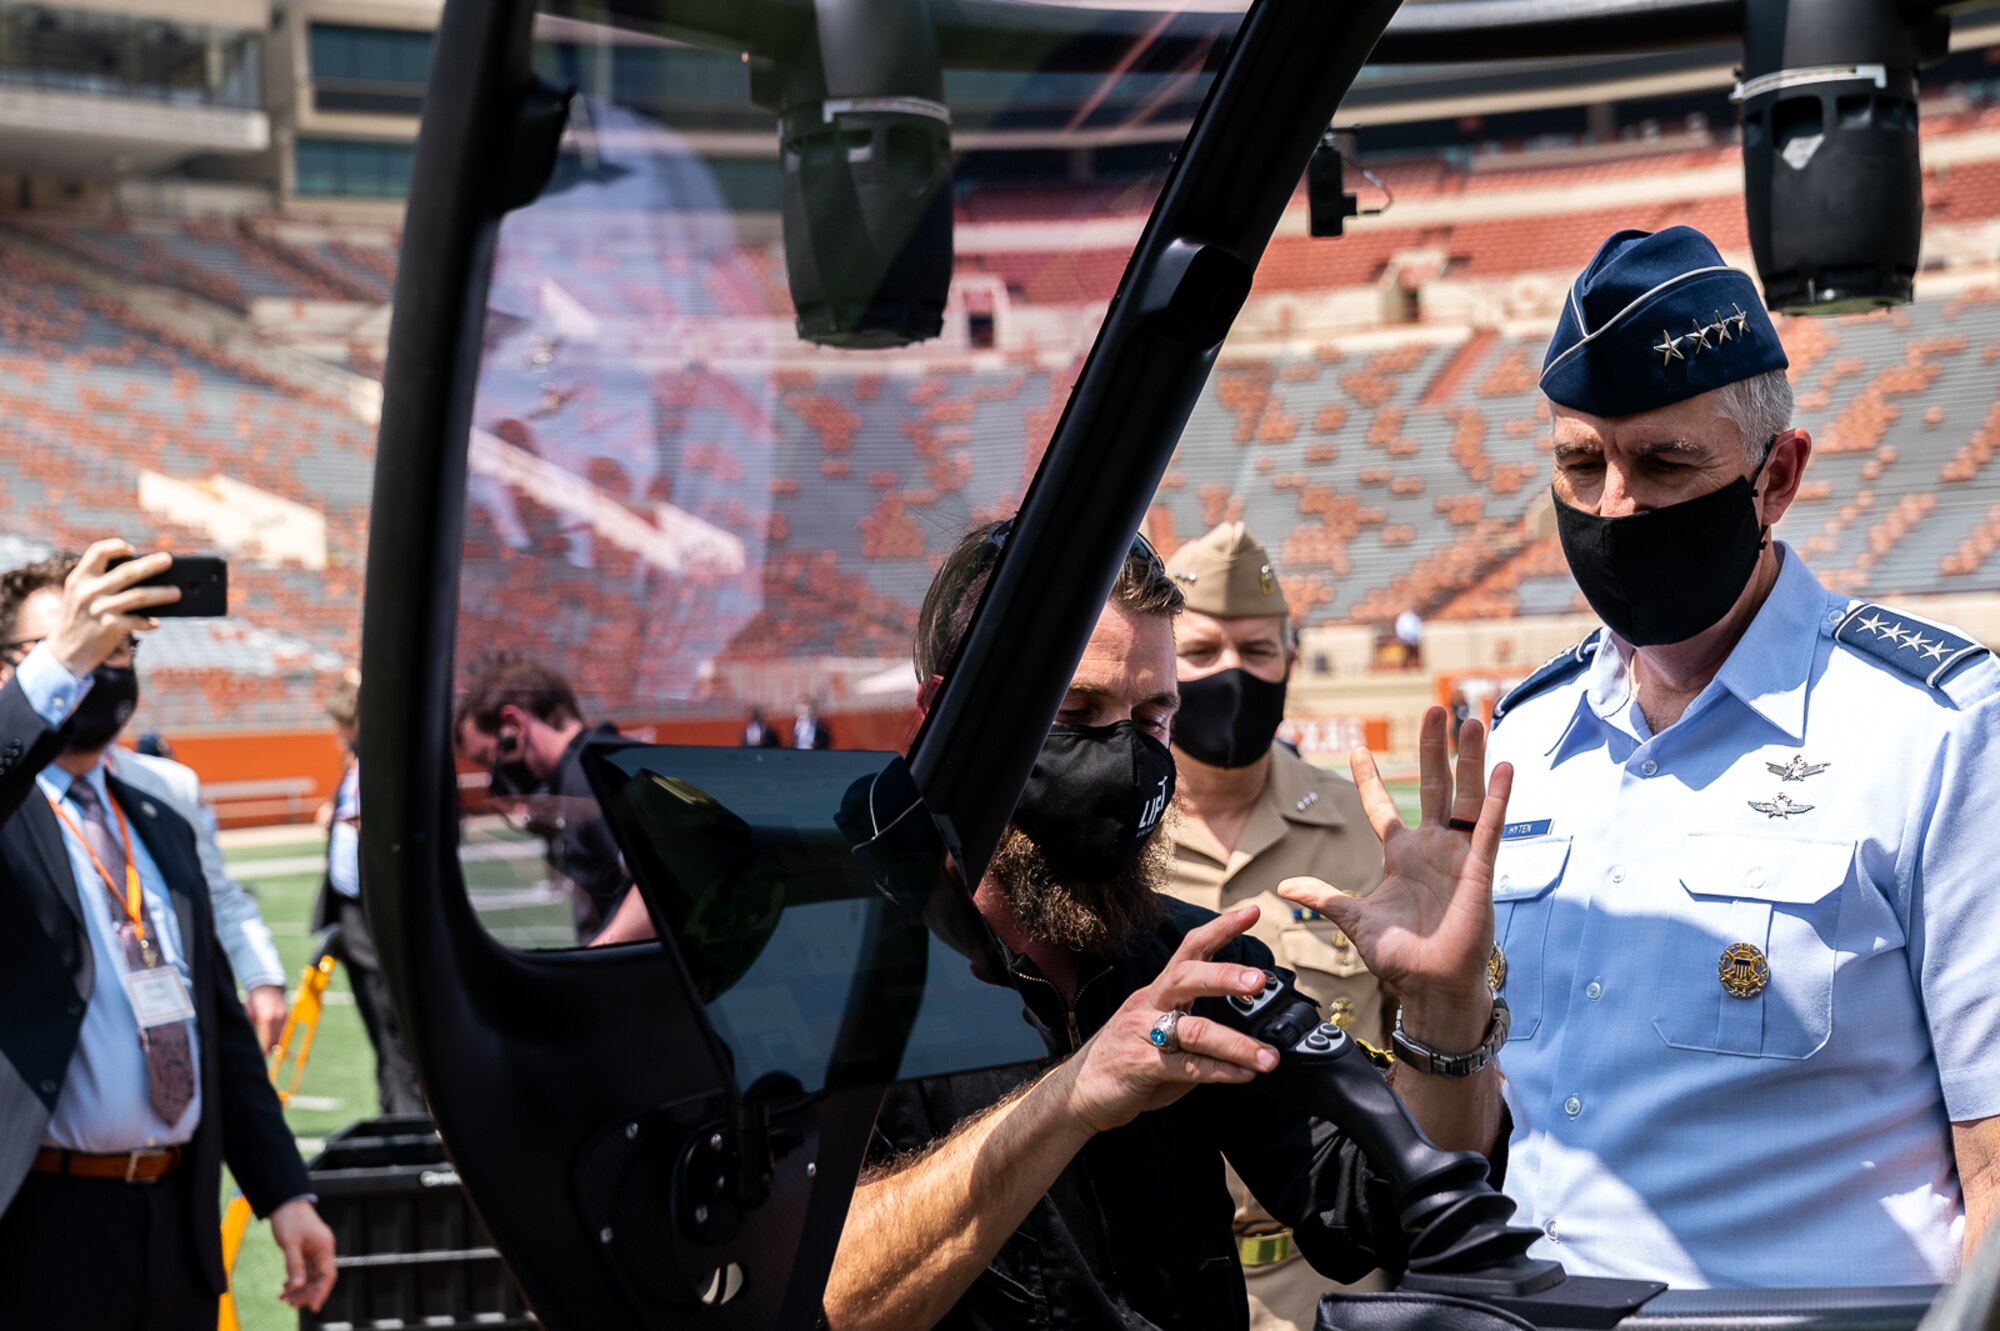 After a landing in the University of Texas at Austin football stadium, LIFT Aircraft’s Flight Development Engineer and Chief Pilot, Jace McCown, explains to Vice Chairman of the Joint Chiefs of Staff, Gen. John E. Hyten, how to operate LIFT’s “Hexa” electric vertical takeoff and landing aircraft. (Photo courtesy of Joint Requirements Oversight Council)